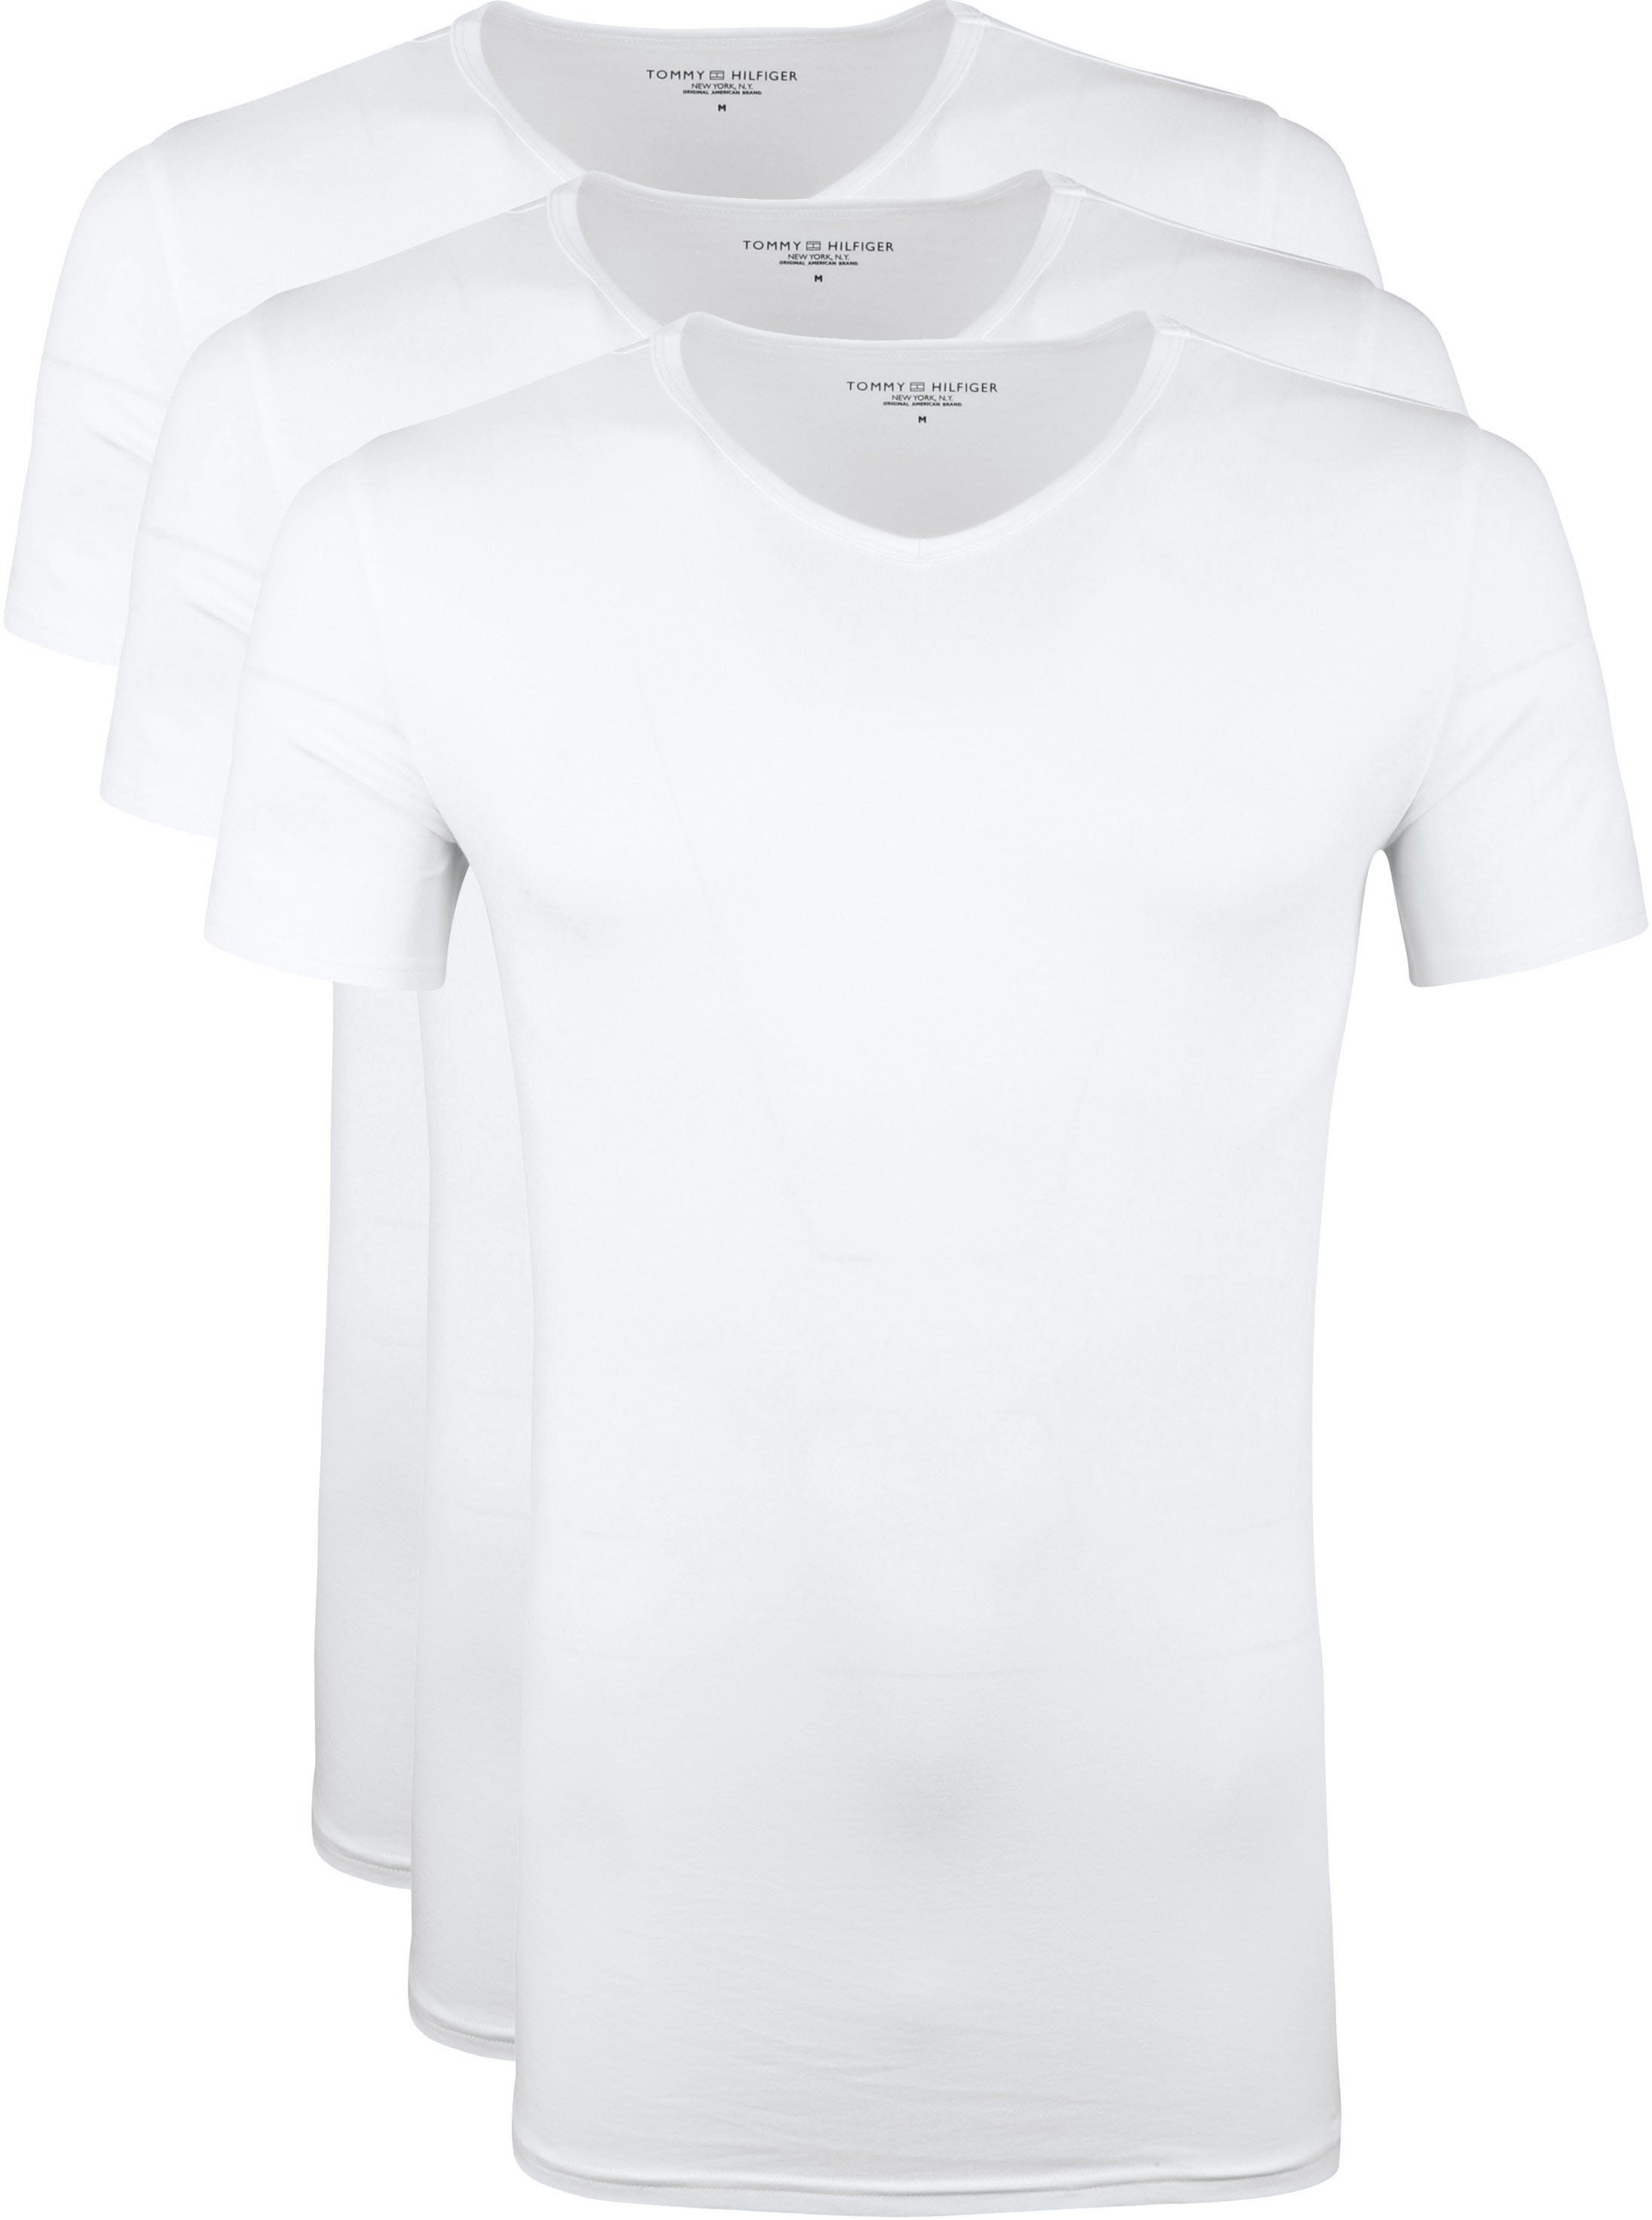 Tommy Hilfiger T-shirts (3Pack) White size S